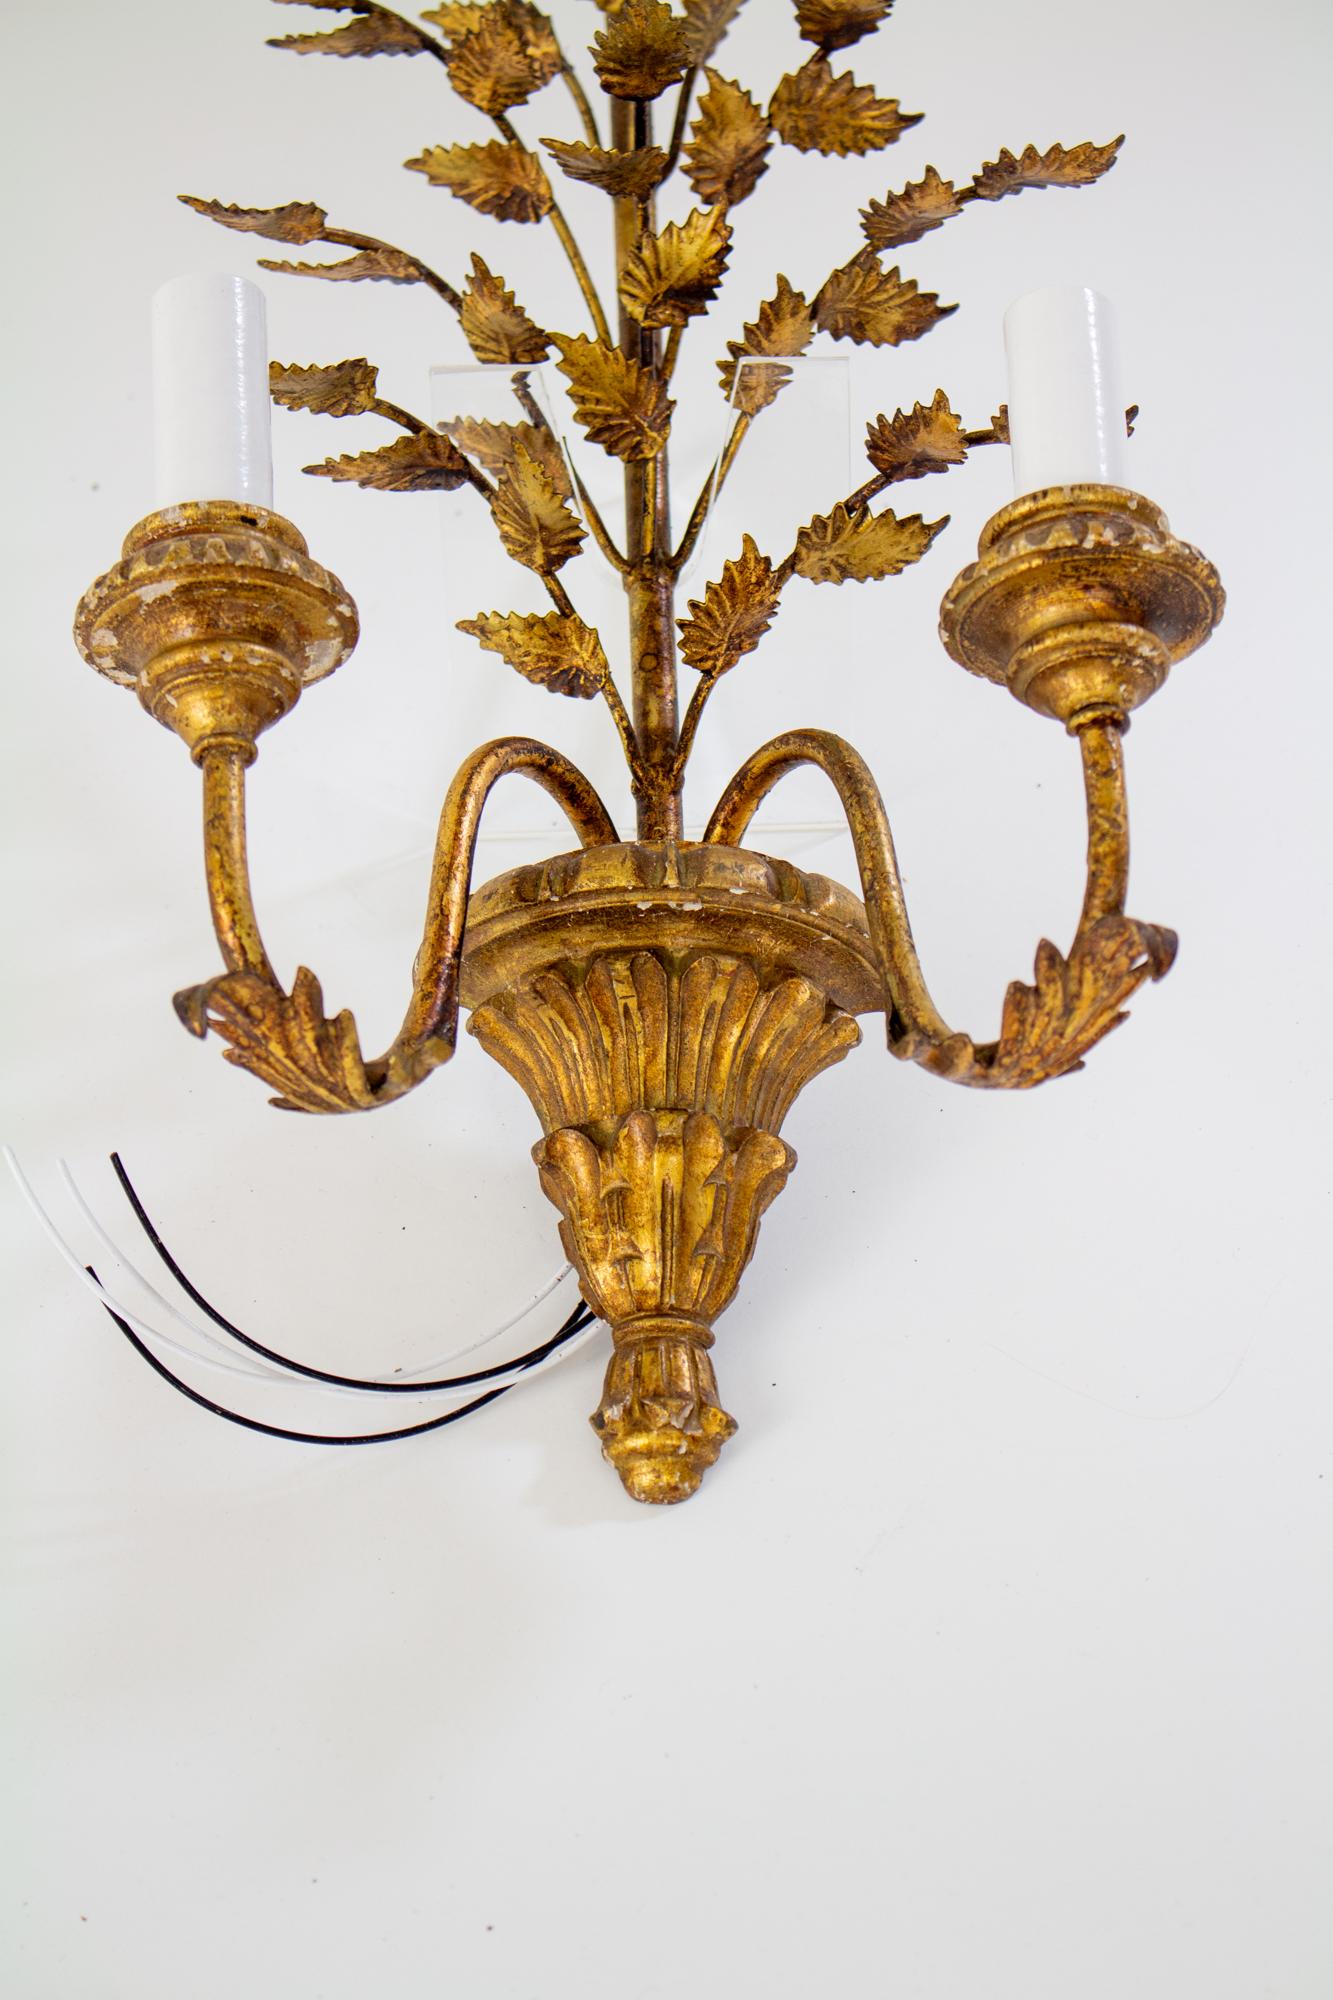 Italian gilt wood and metal leaf sconces, a pair. Leafy arms extend from a bottom ornate cap. Small leafy arms extend up between the arms. Antique gilt finish in good condition. Some light ships on the gilt wood elements. Hangs from a top hook, will